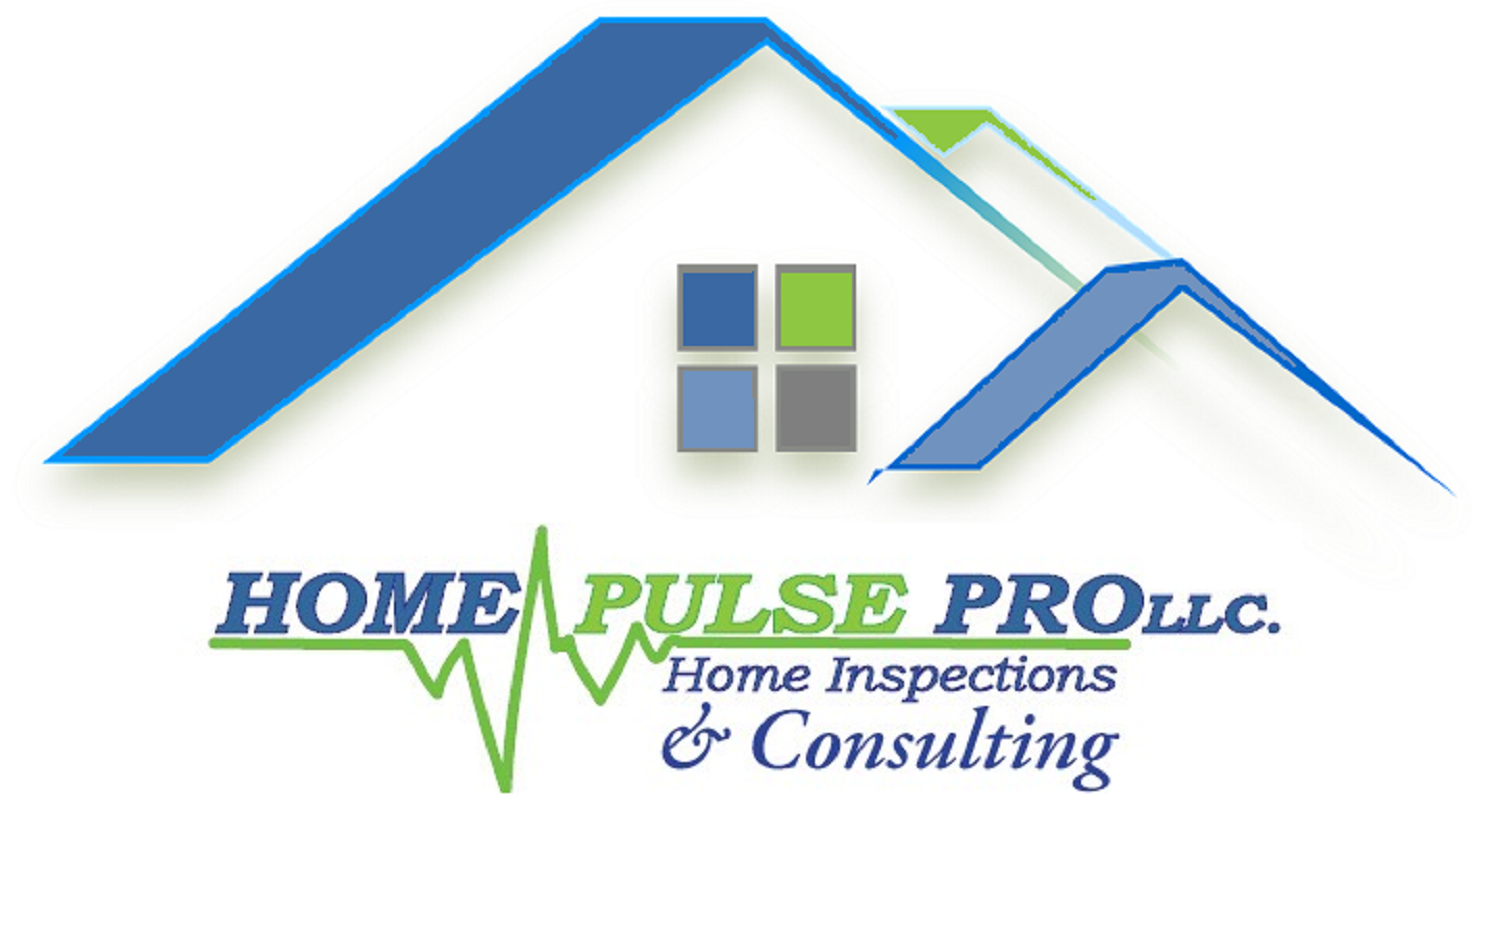 Home Pulse Pro Inspections & Consulting